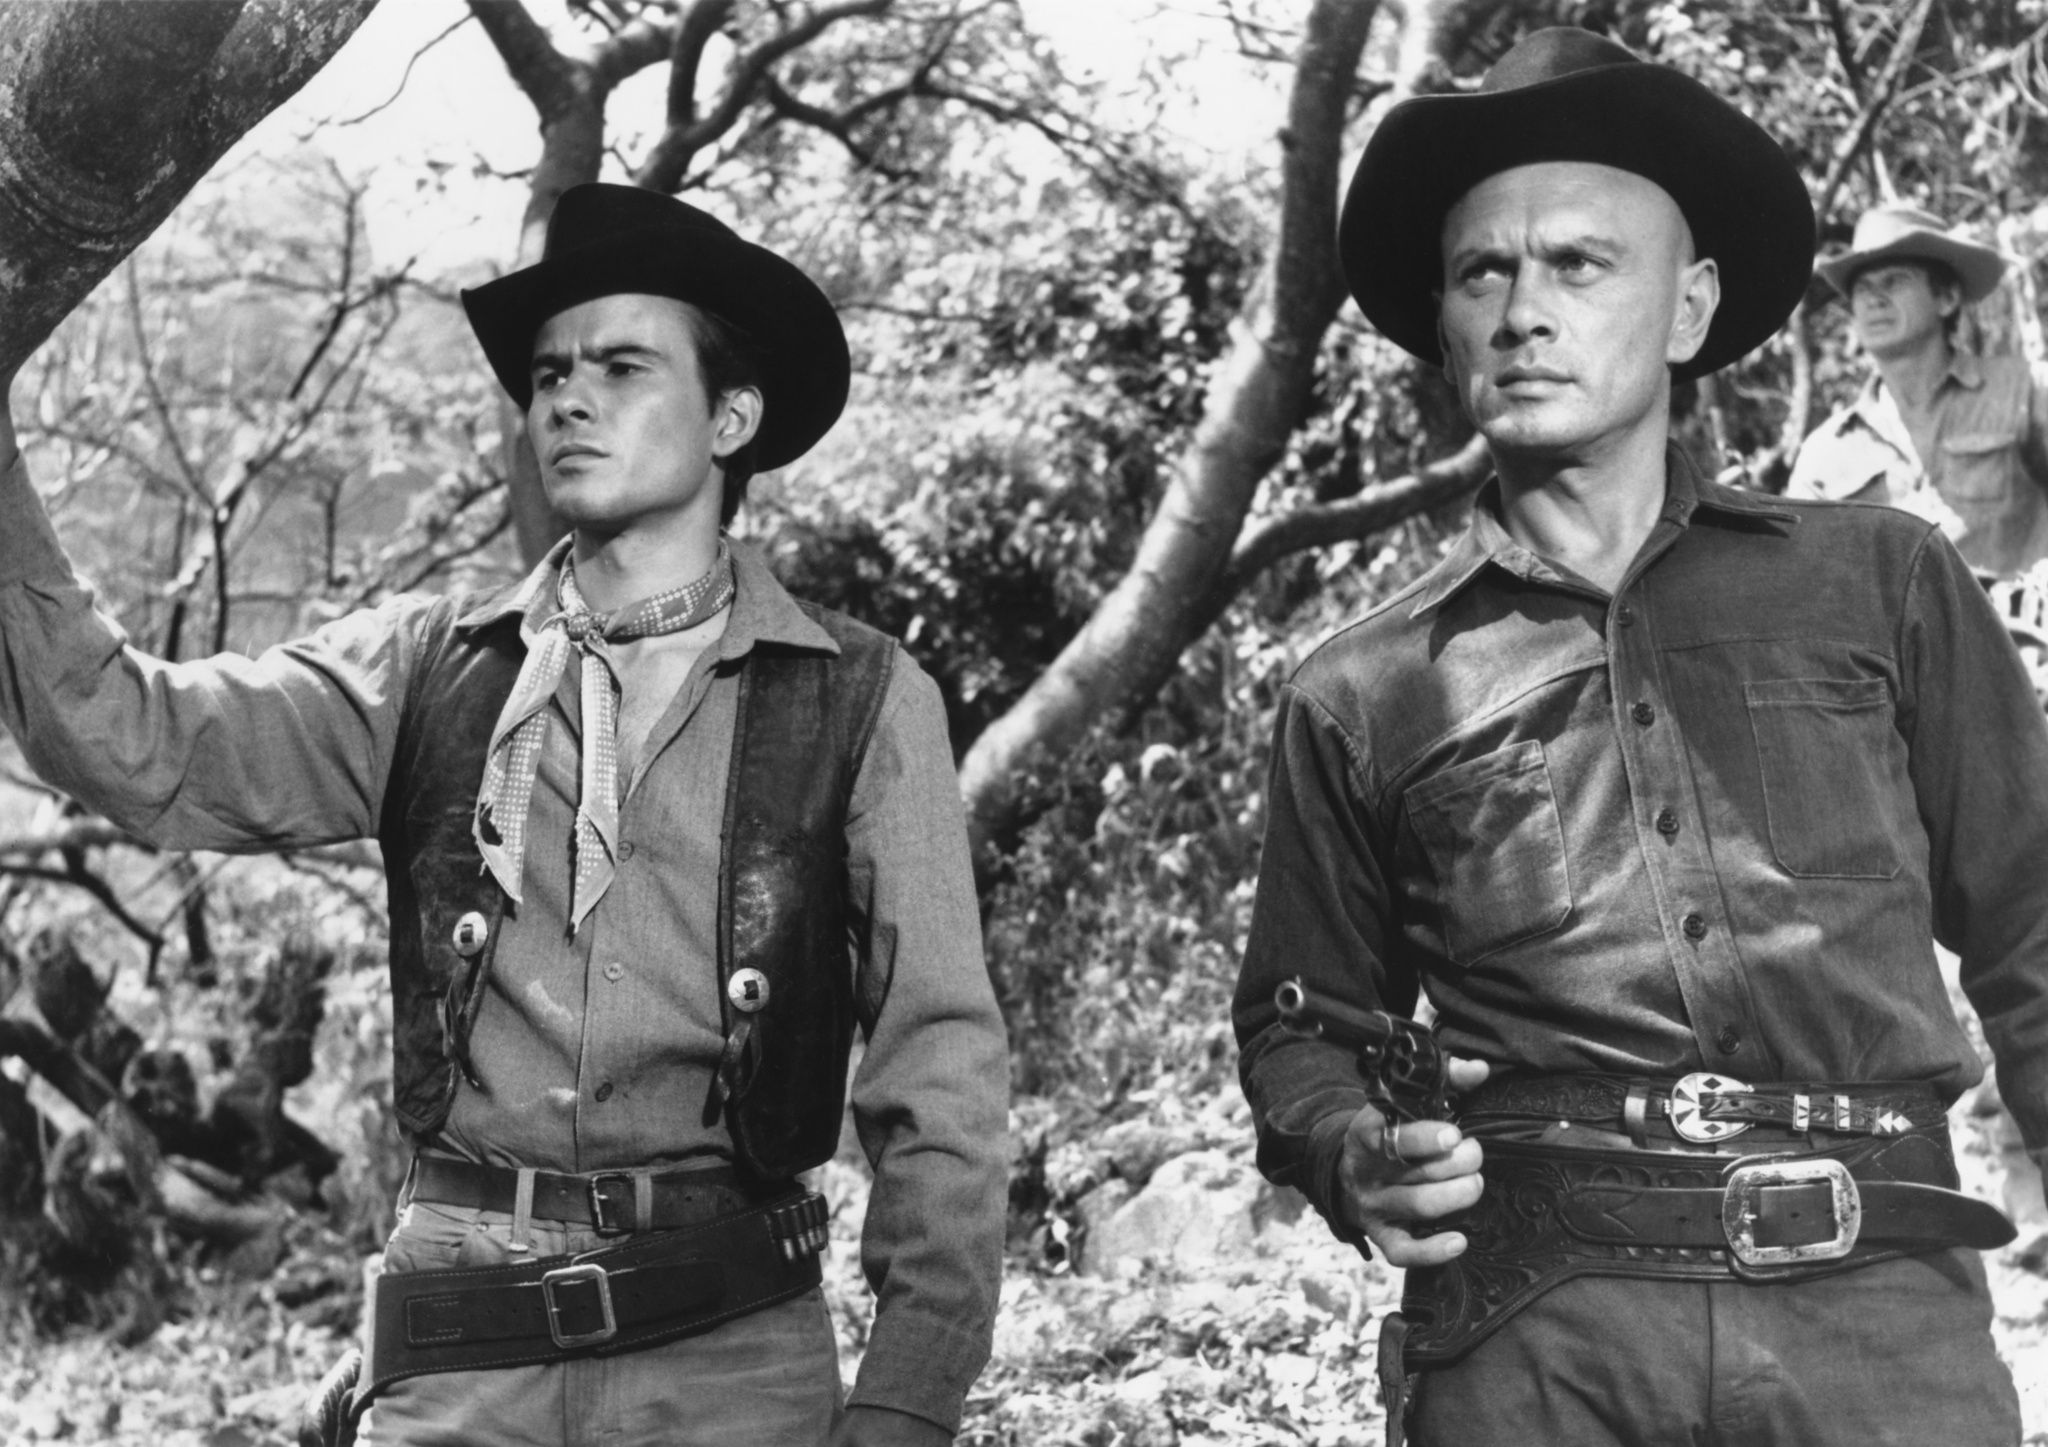 Still of Yul Brynner and Horst Buchholz in The Magnificent Seven (1960)